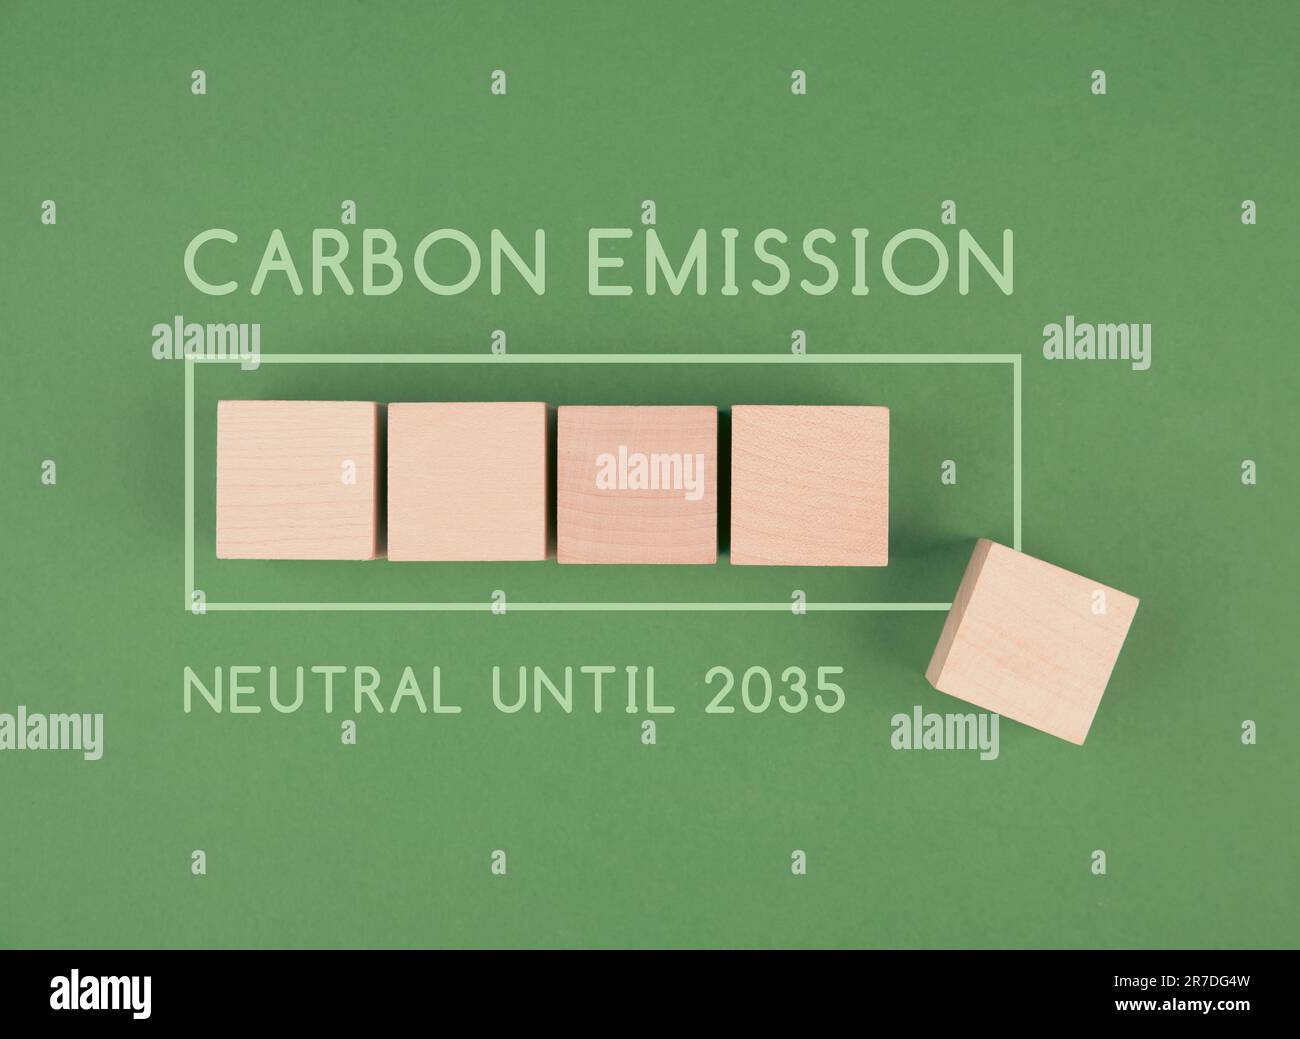 Carbon emission neutral until 2035, loading bar for green energy, CO2 reduce footprint, sustainable renewable electricity , environment protection Stock Photo